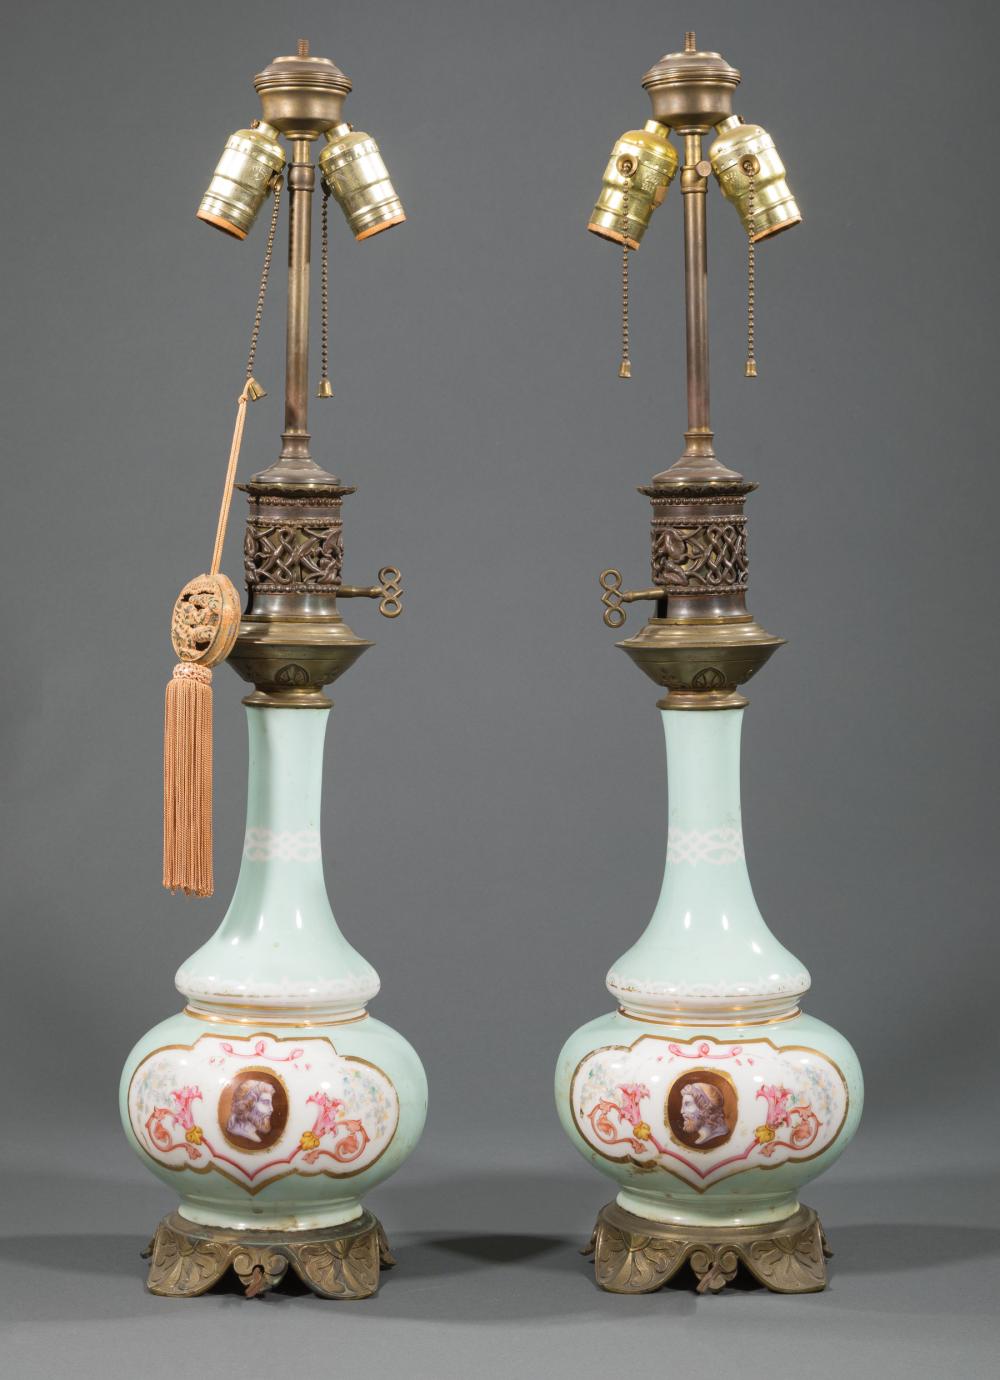 PAIR OF FRENCH PORCELAIN CARCEL 31a184